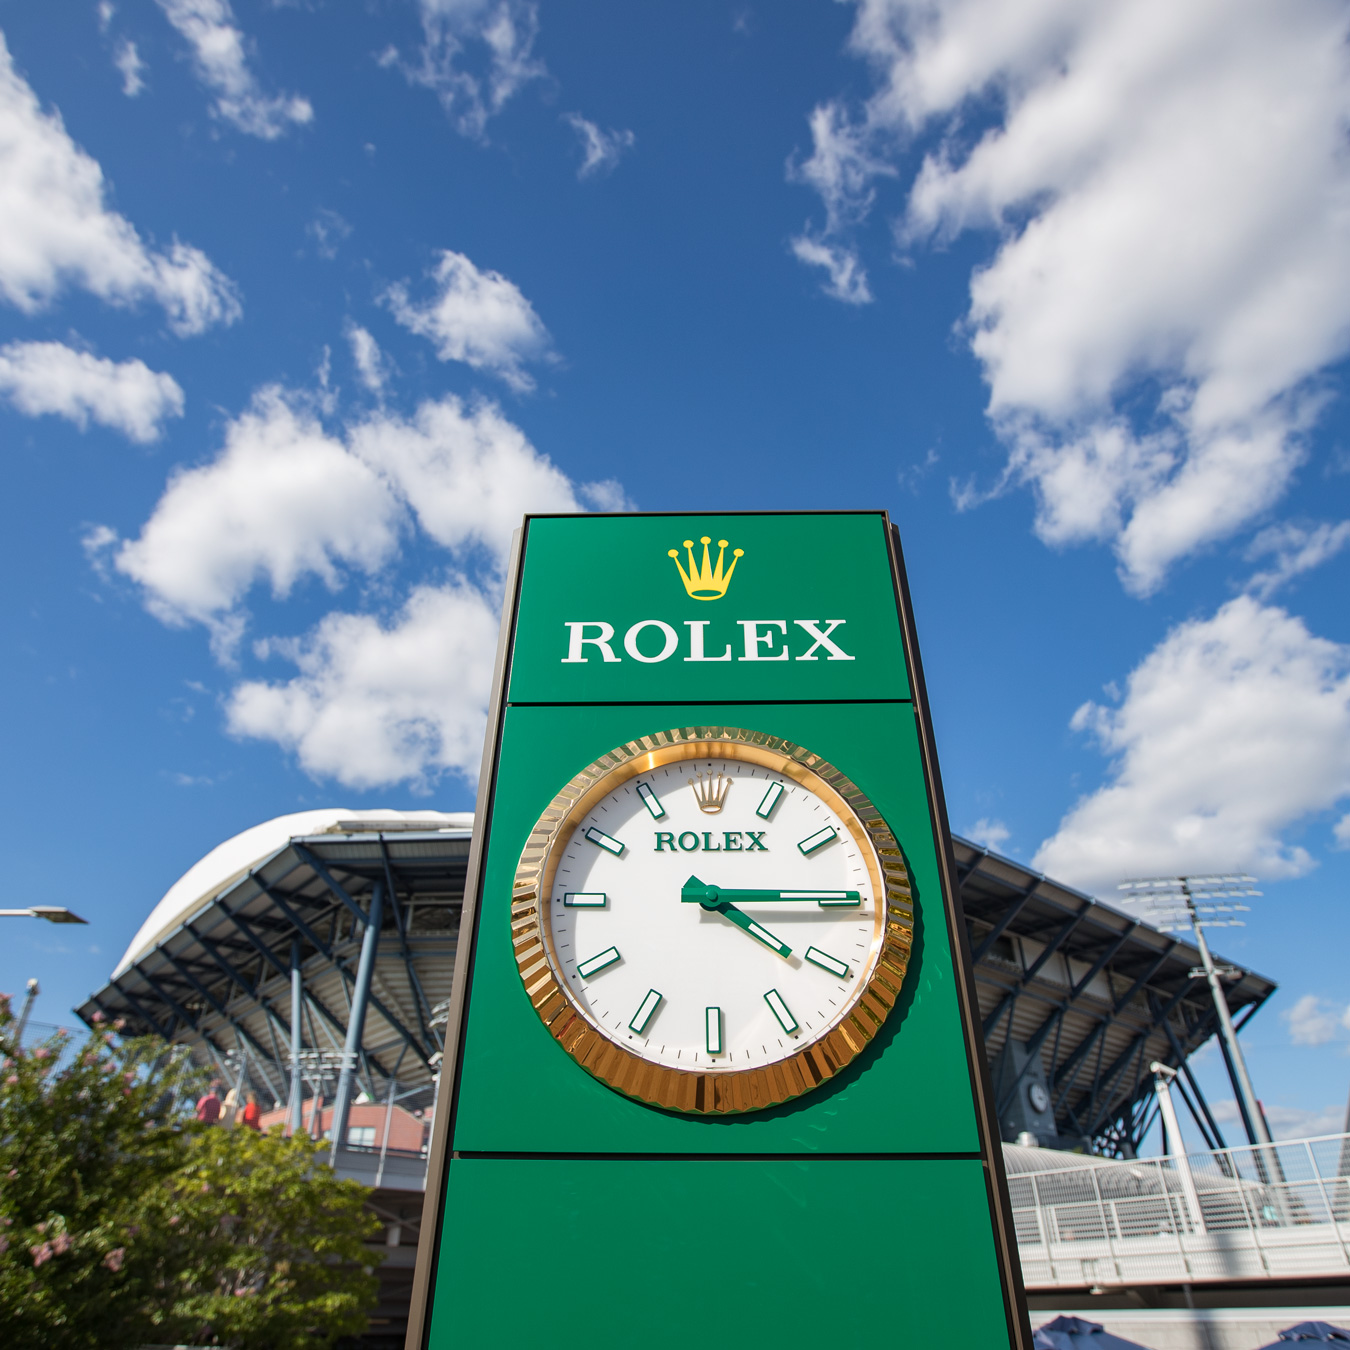 Rolex and its involvement in the sport